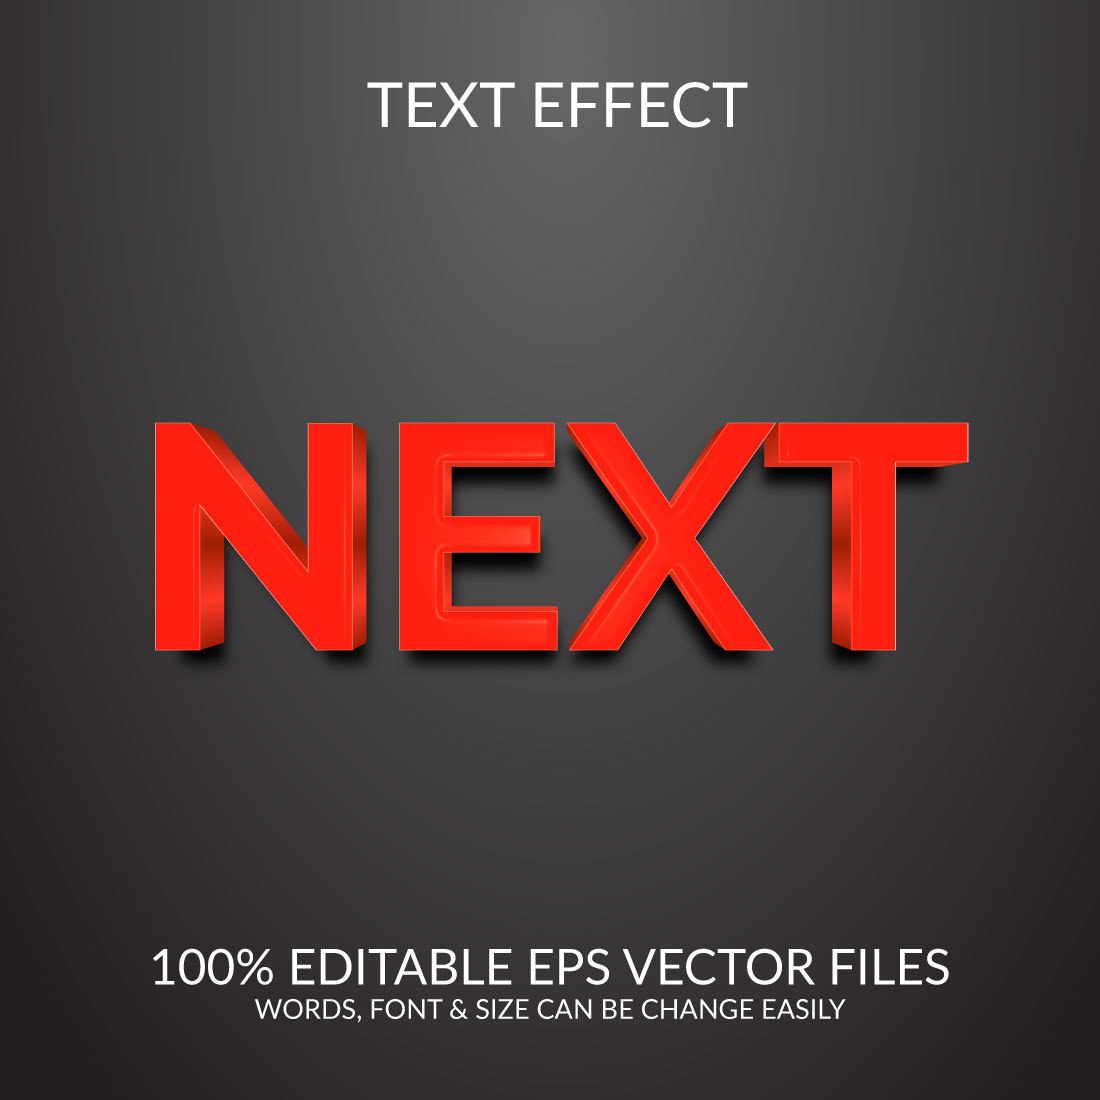 Next 3d vector text effect template design cover image.